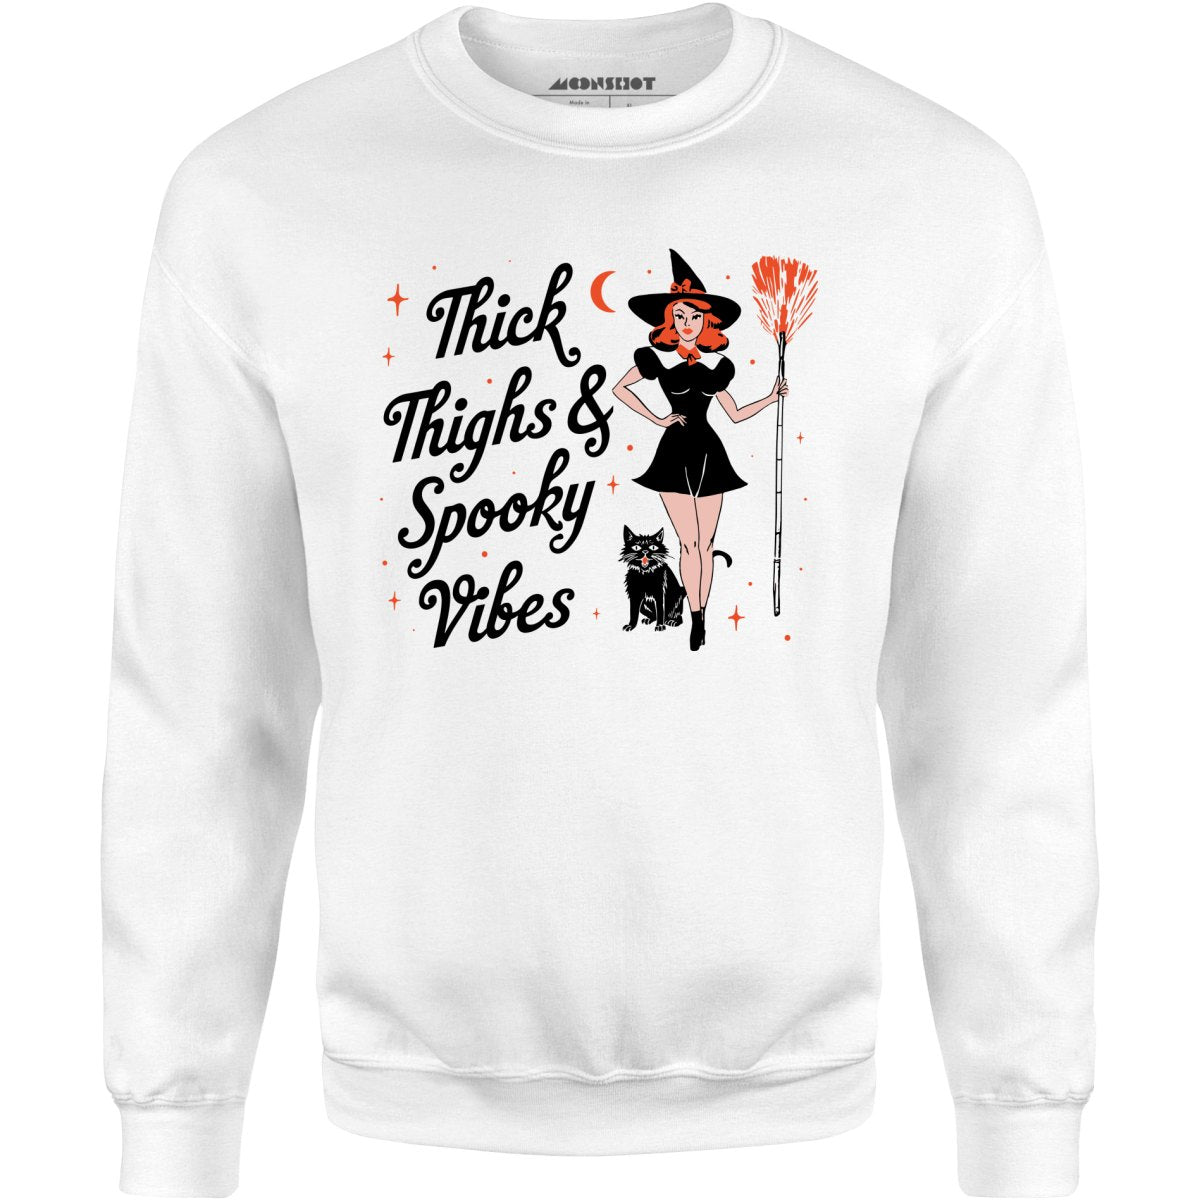 Thick Thighs and Spooky Vibes - Unisex Sweatshirt